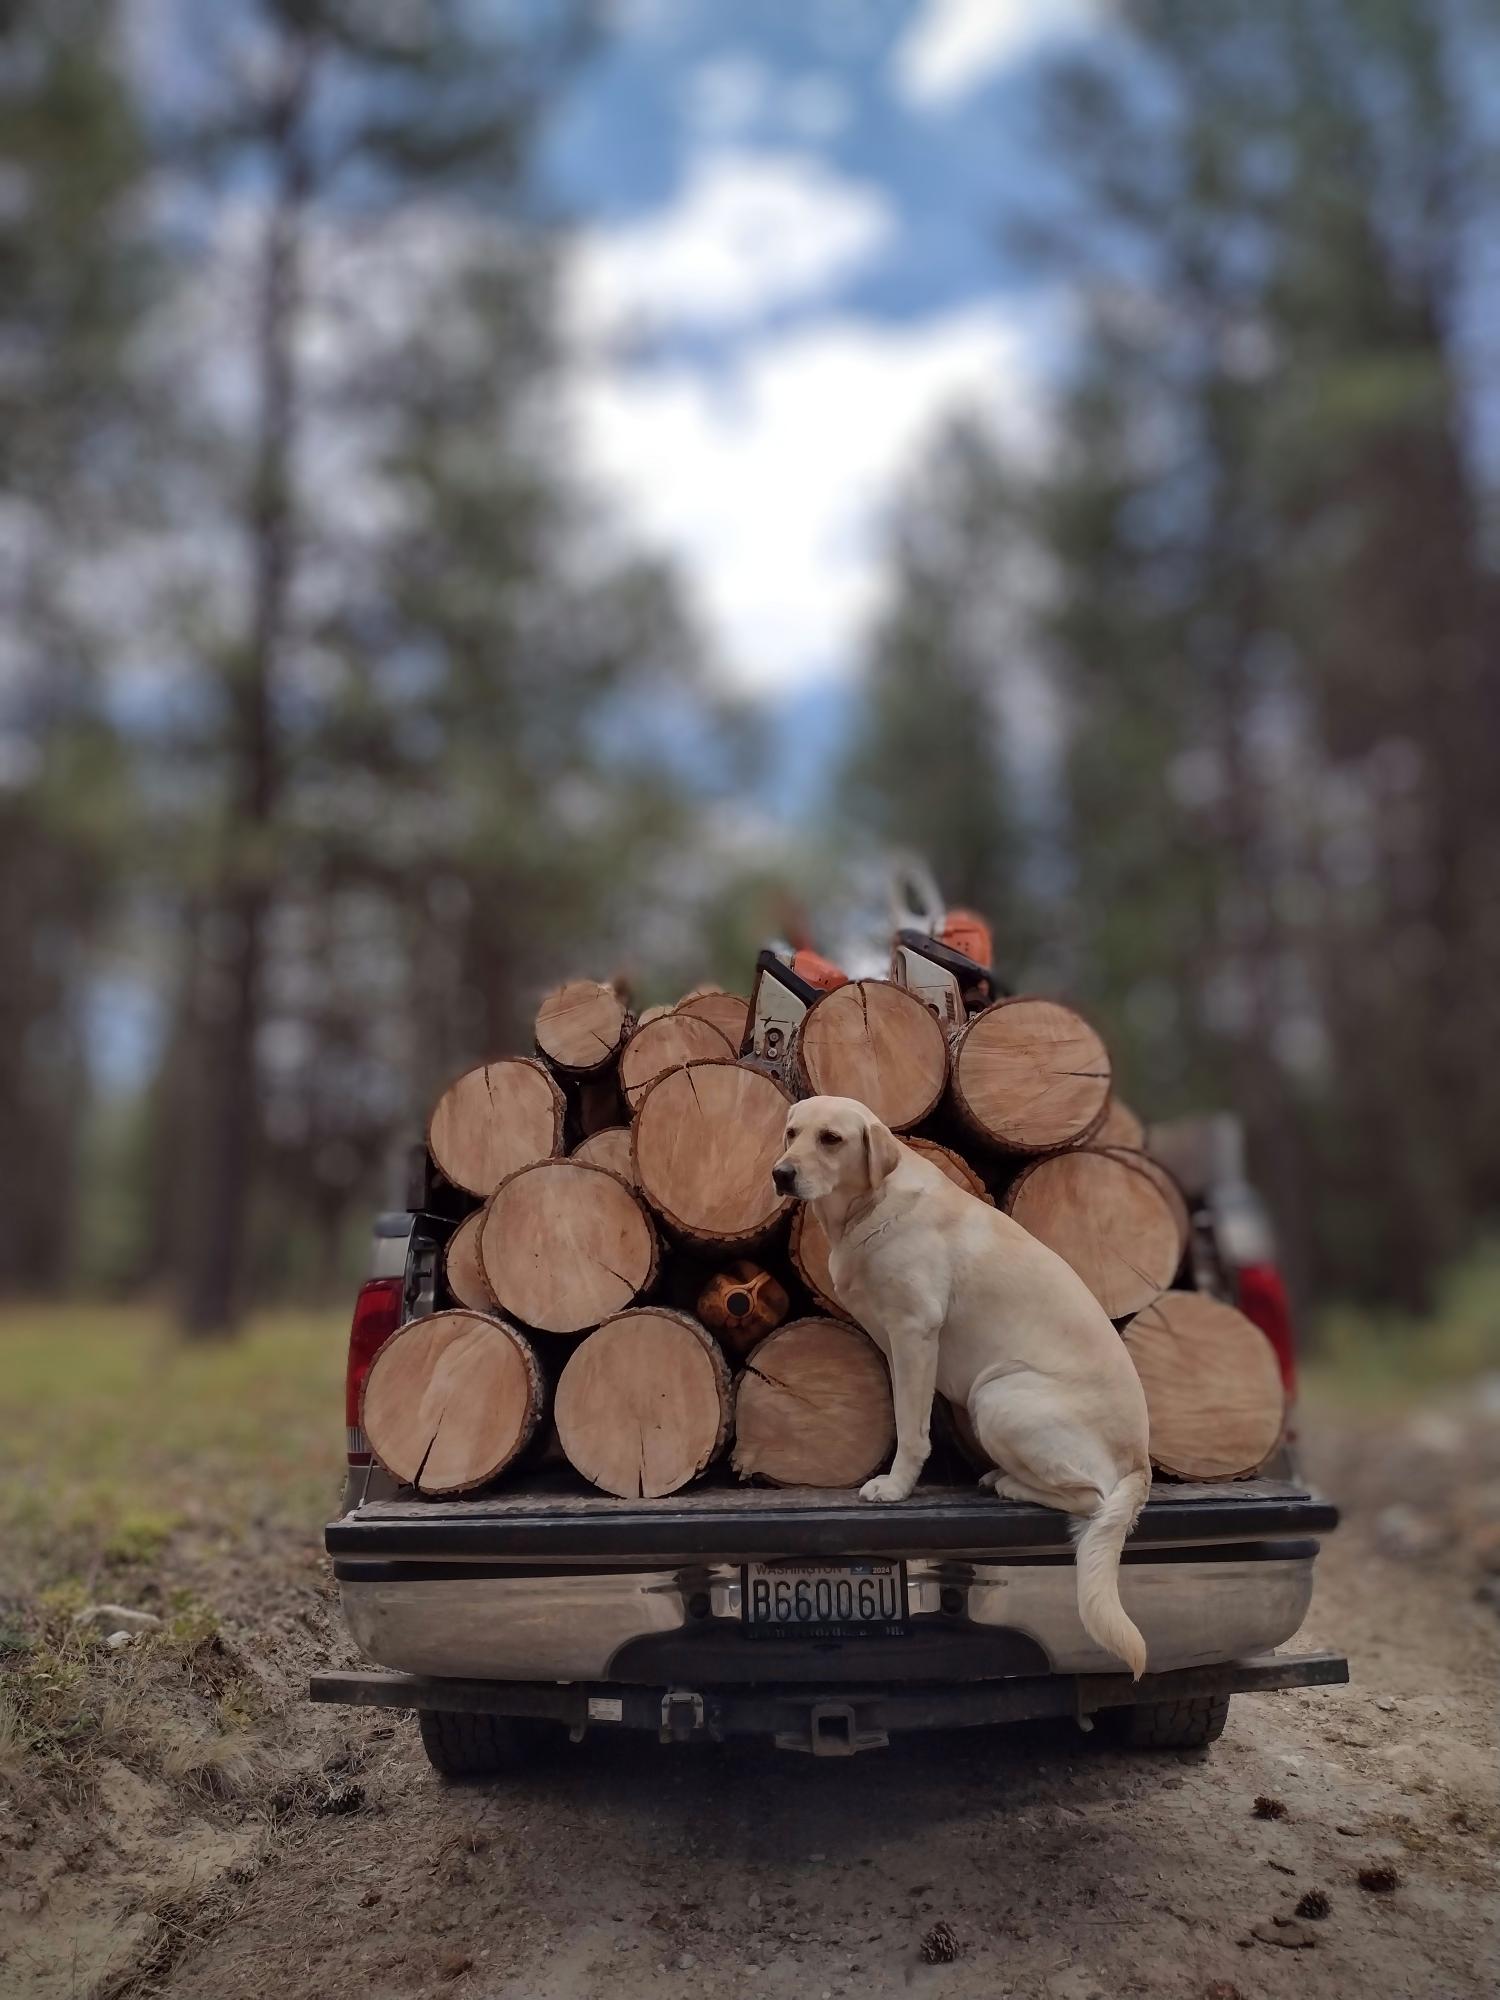 Our pup "Tig" loves to go woodcuttin'.